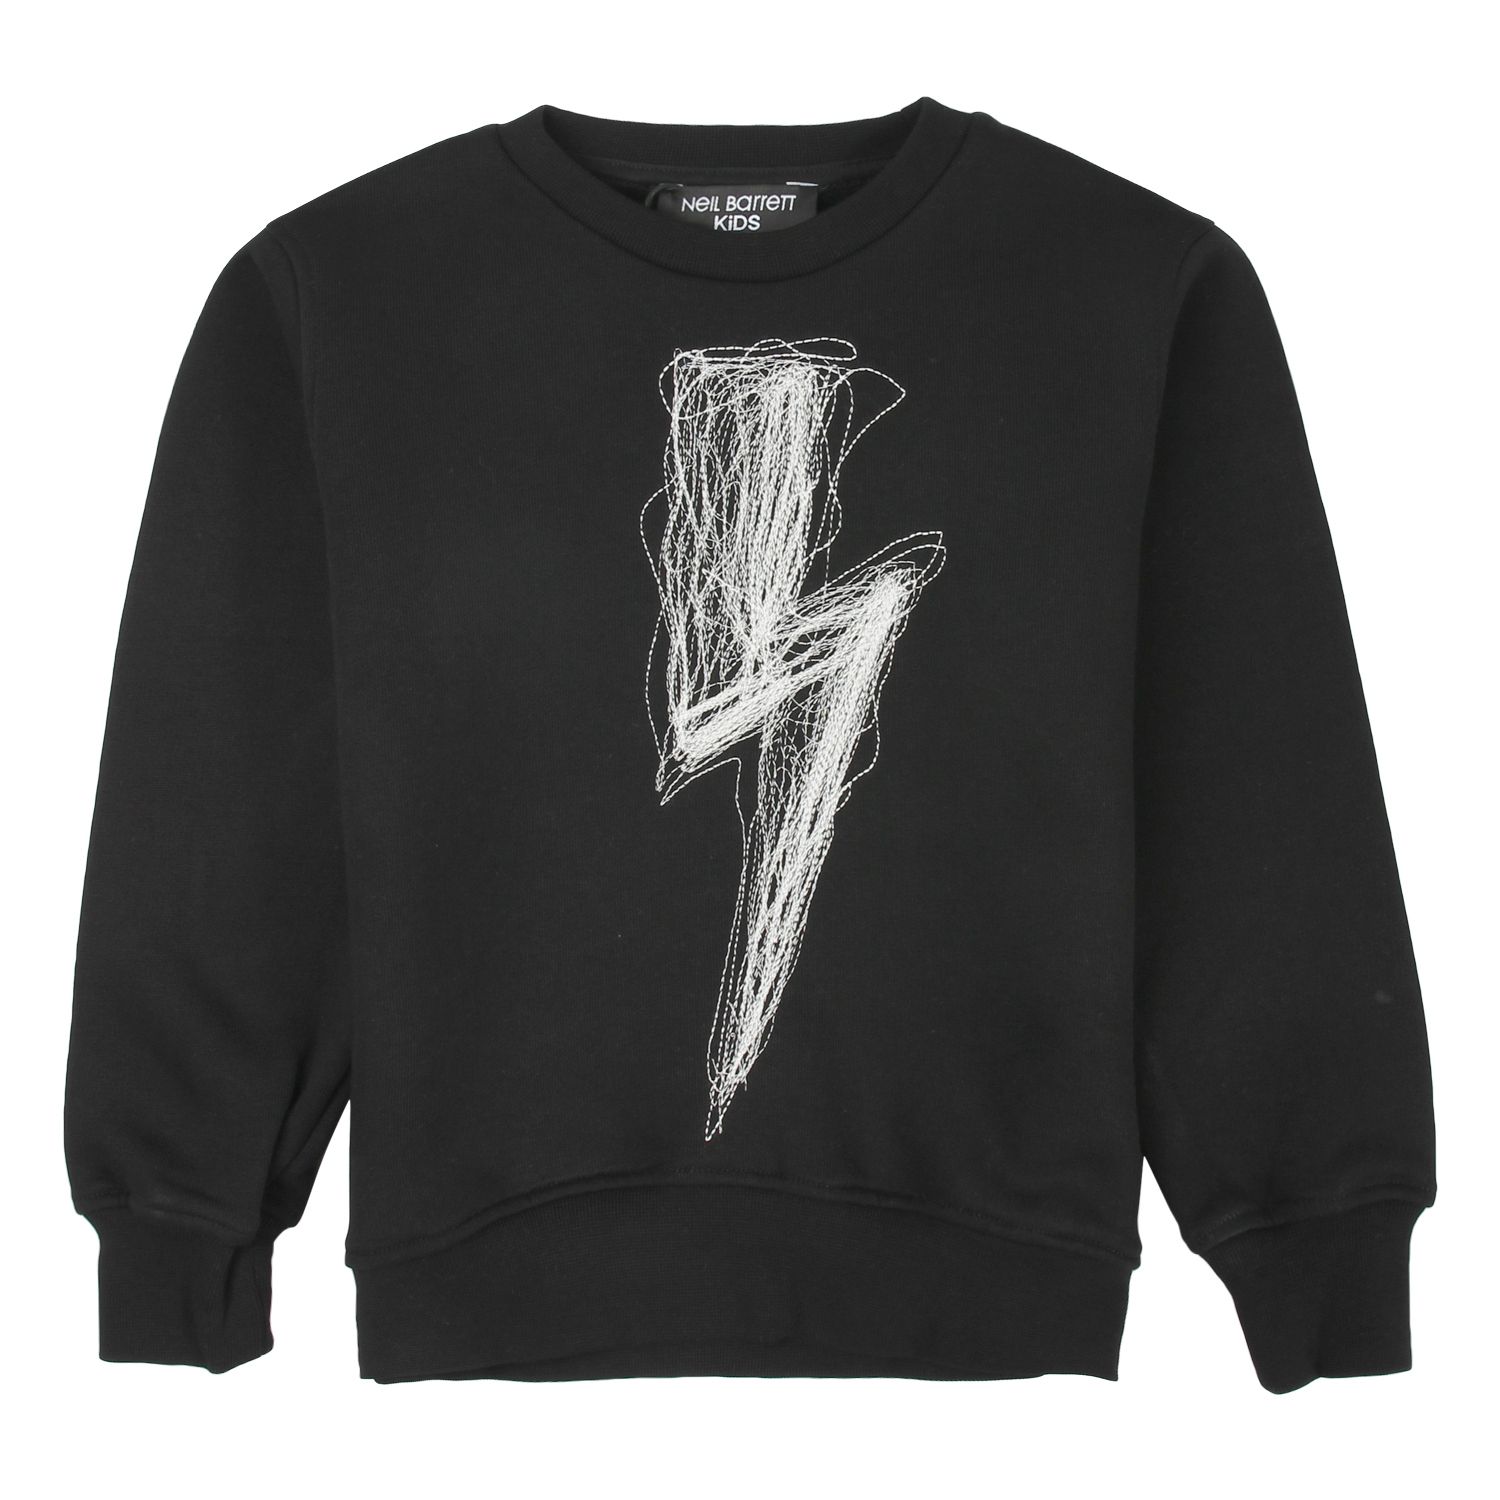 Neil Barrett black sweatshirt -Details long-sleeved sweatshirt with elastic cuffs, U-neck, black background, front with lightning bolt depicted in the center in large size, basic back -Wash max 30 °